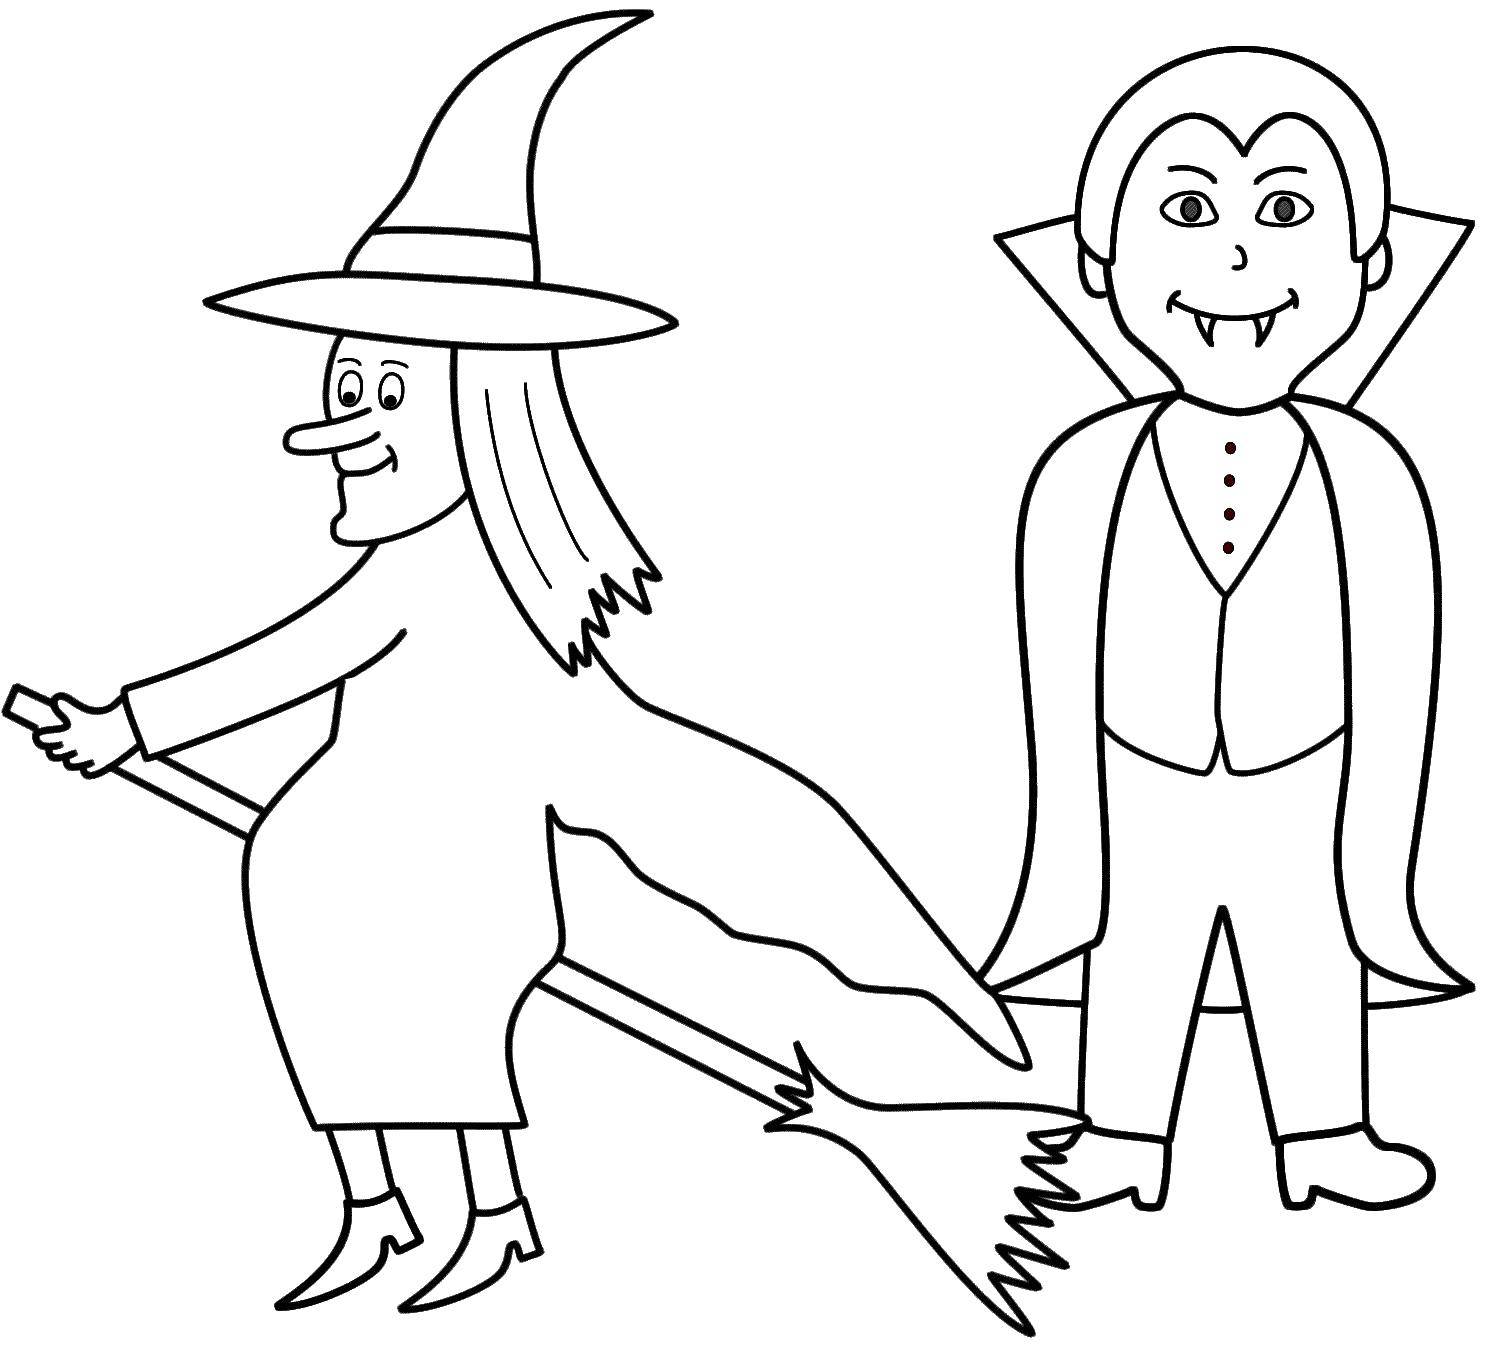 Coloring The witch and vampire. Category witch. Tags:  Halloween, vampire, Dracula, witch, broom.